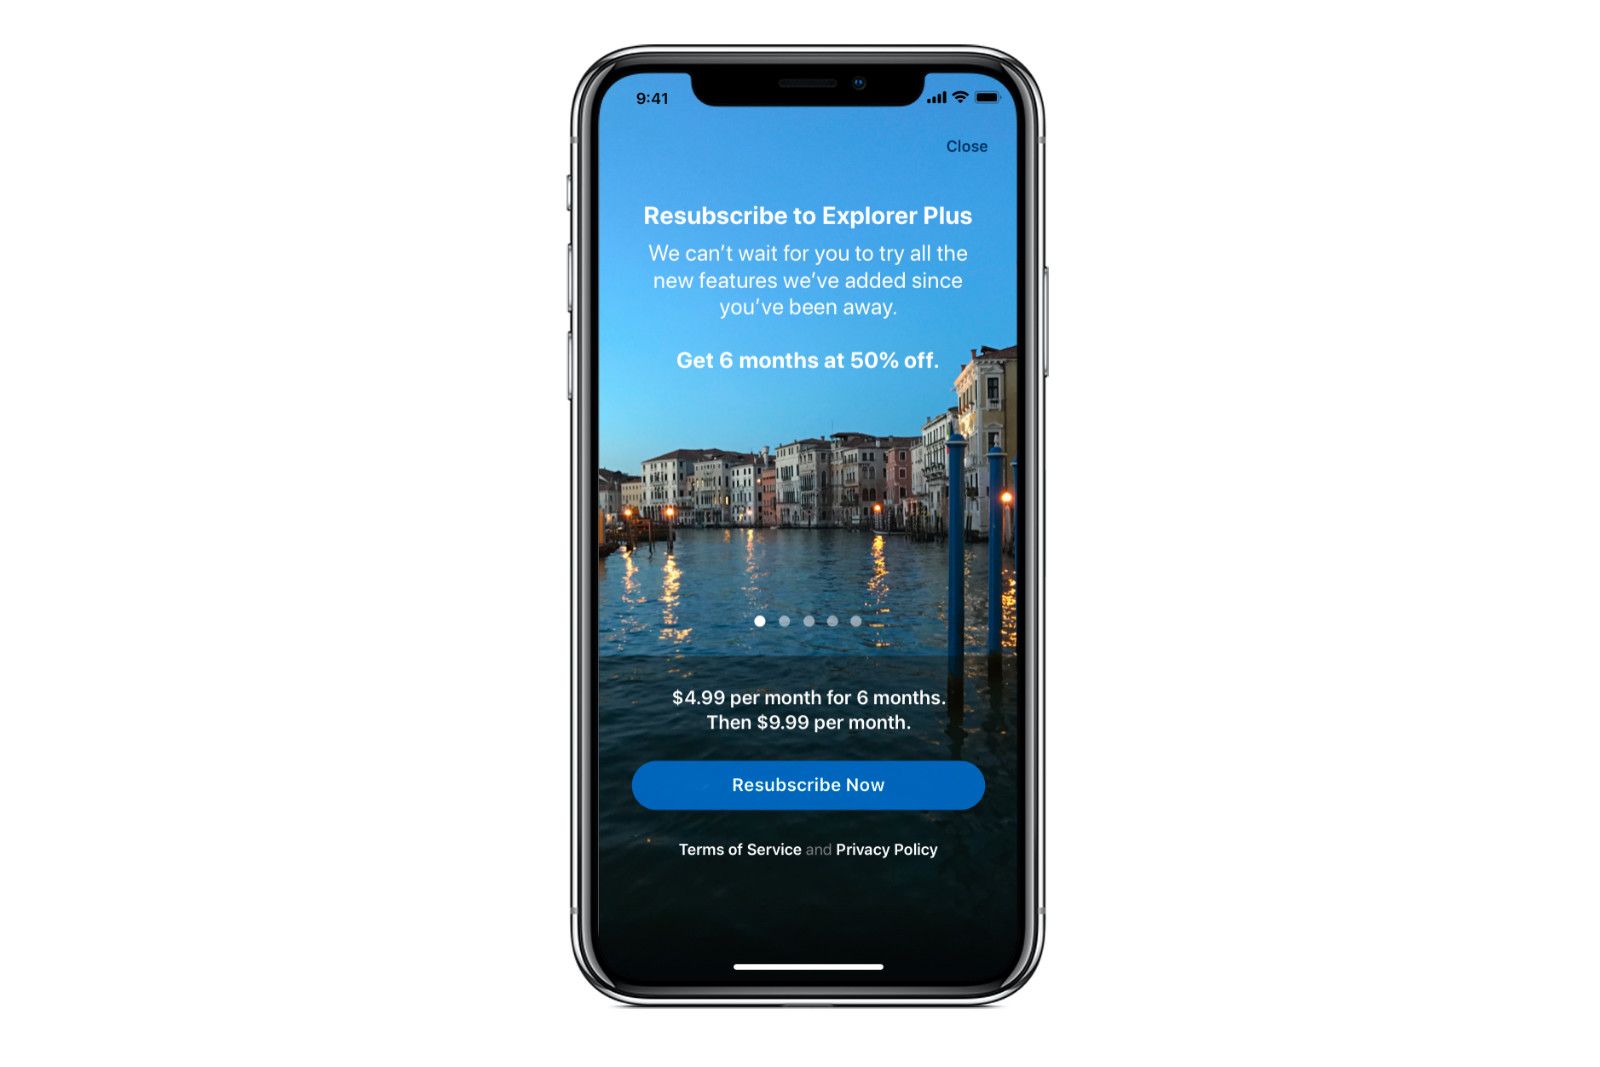 Apple is bringing App Store subscription offer codes with iOS 14 photo 1